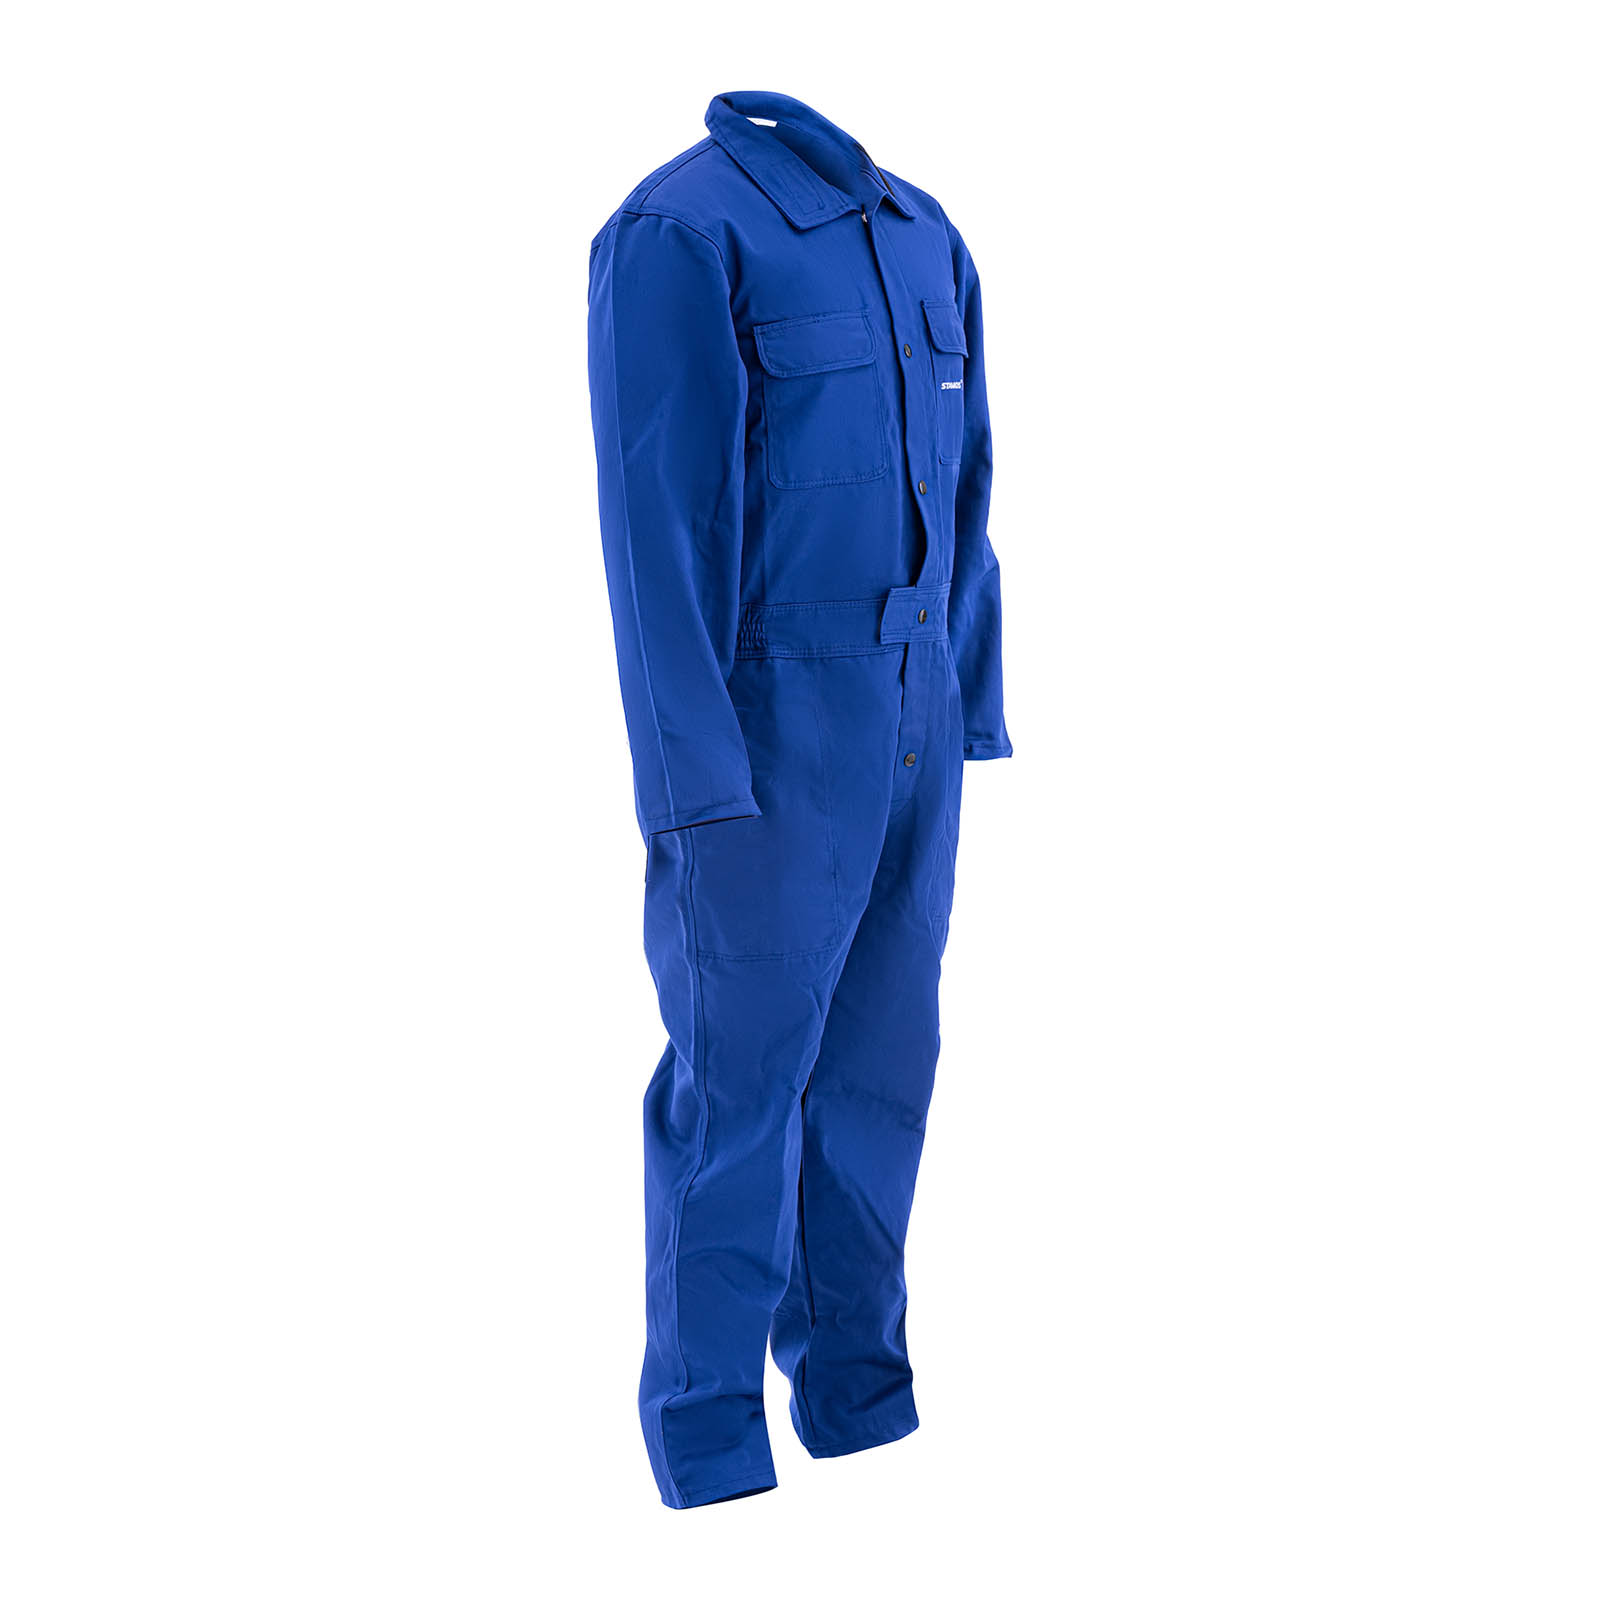 Welder Overall - Size L - Blue